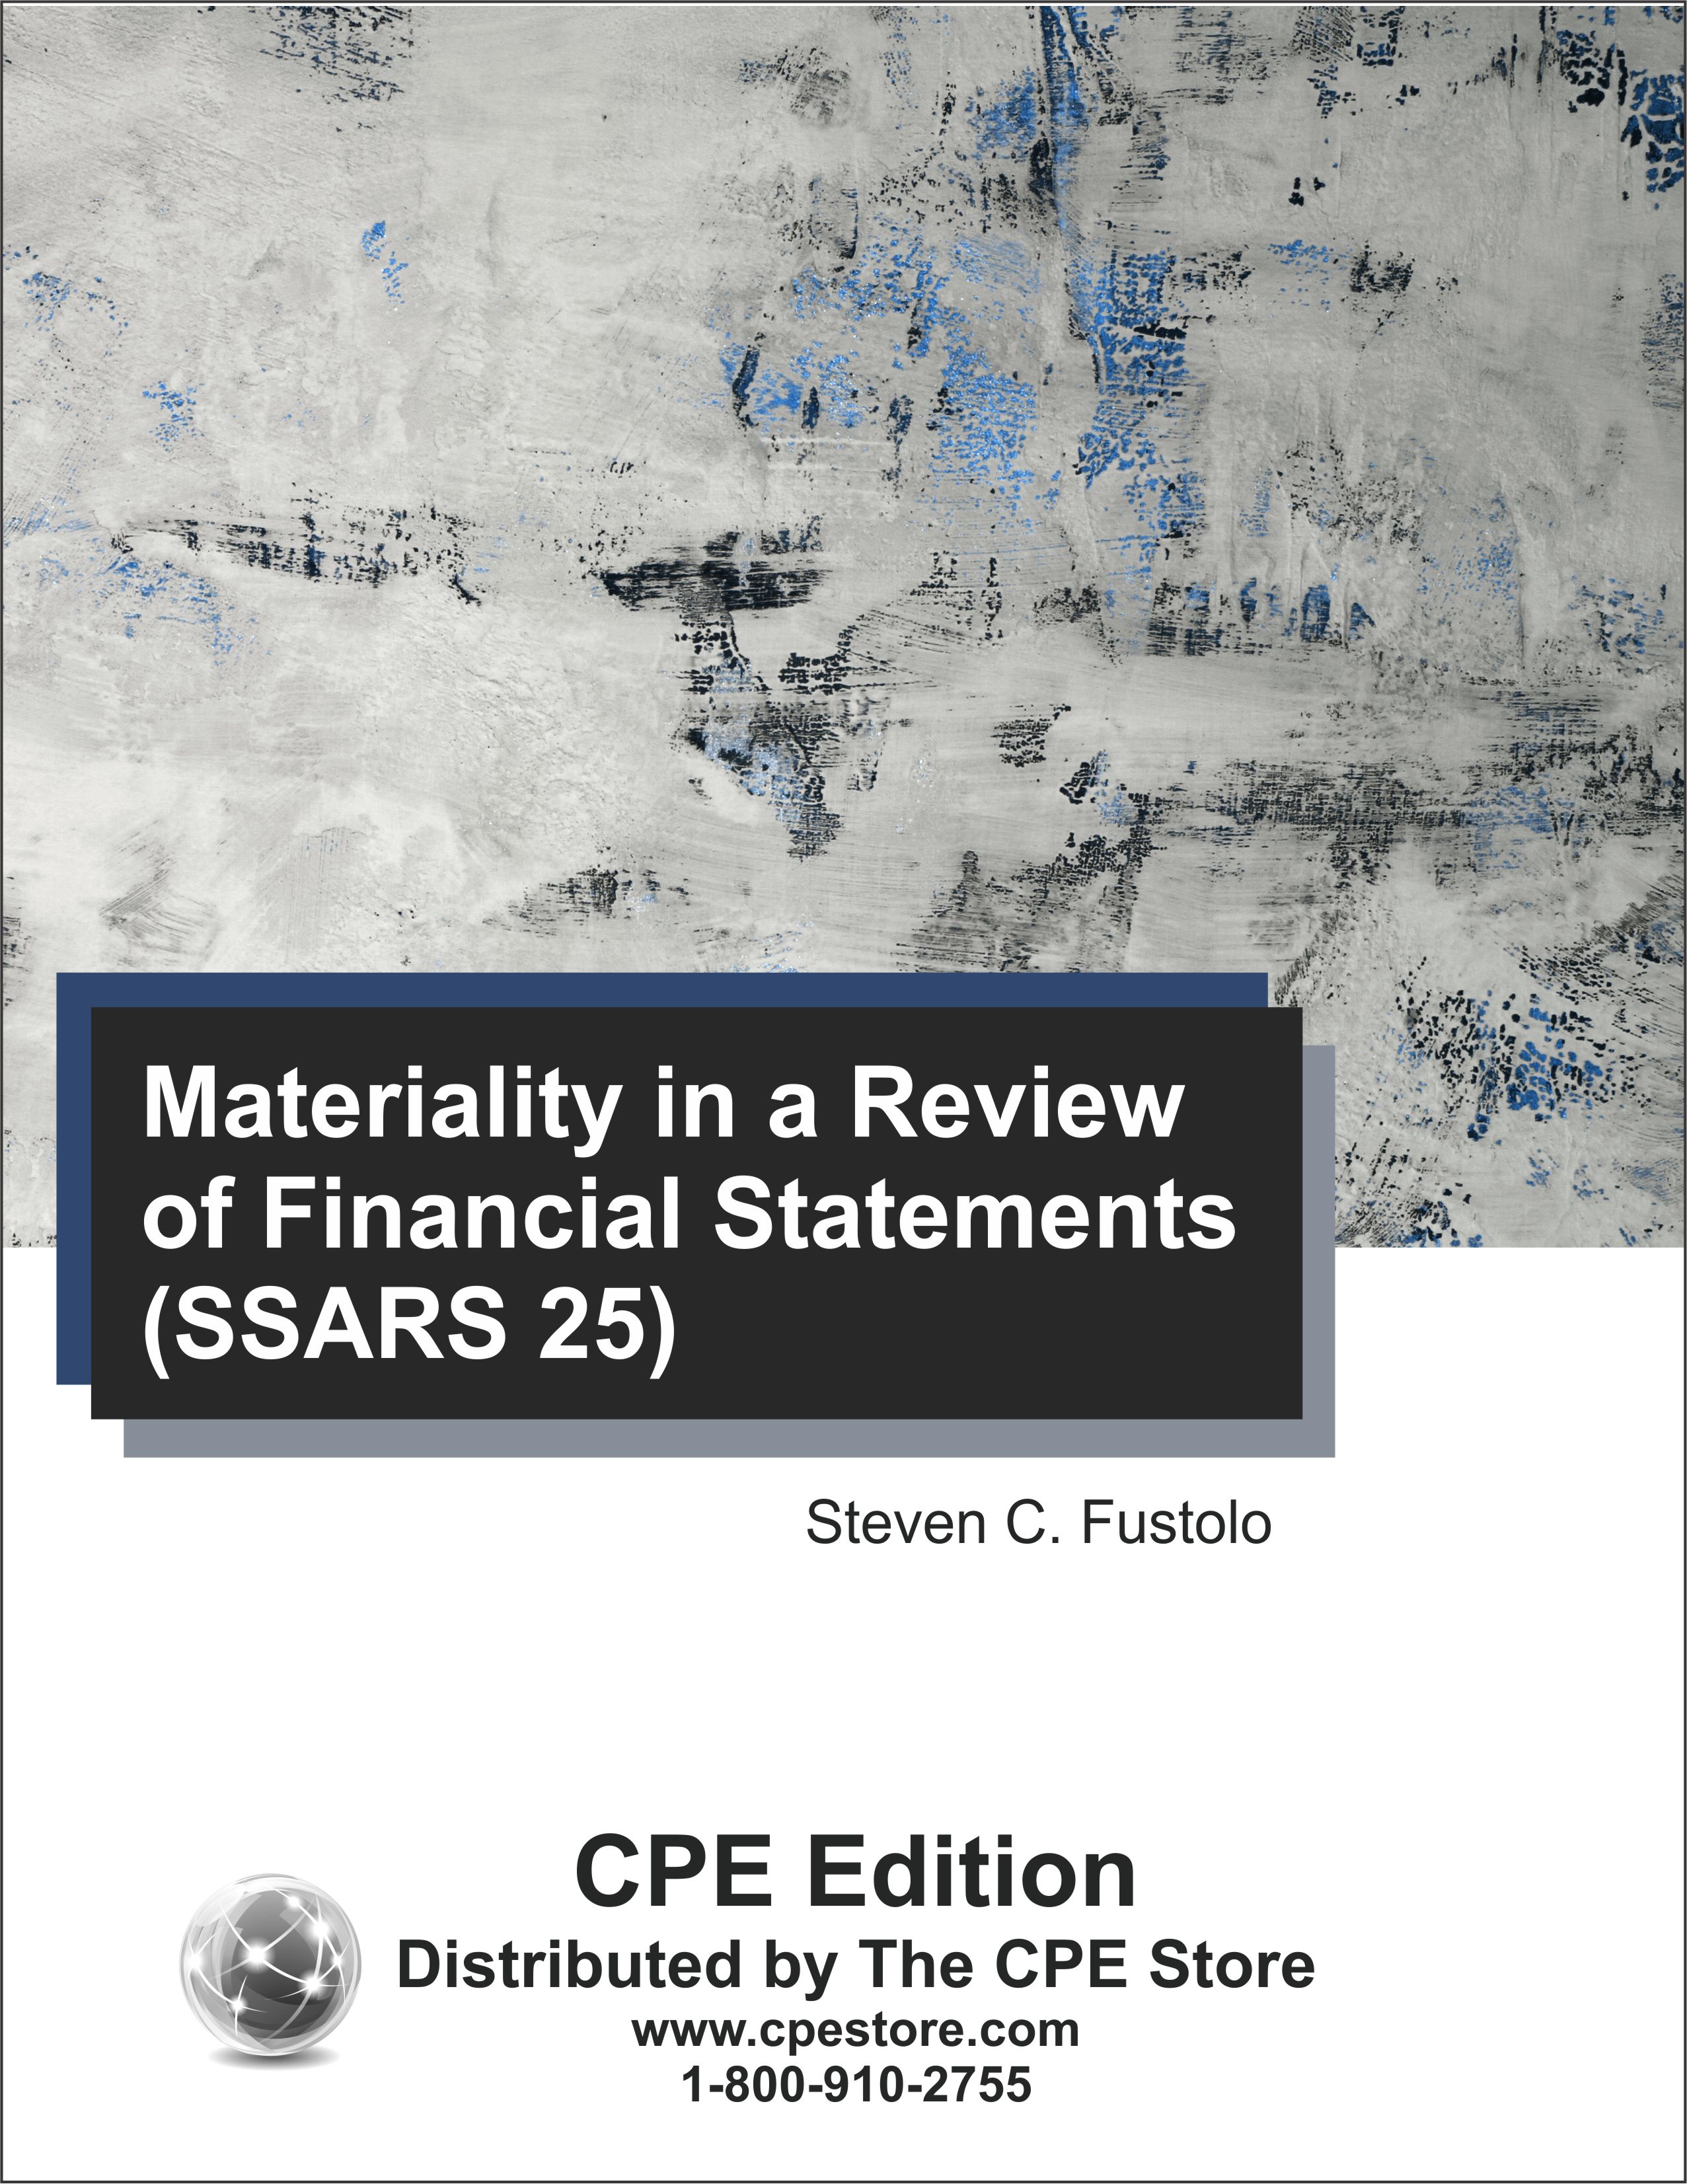 Materiality in a Review of Financial Statements (SSARS 25)